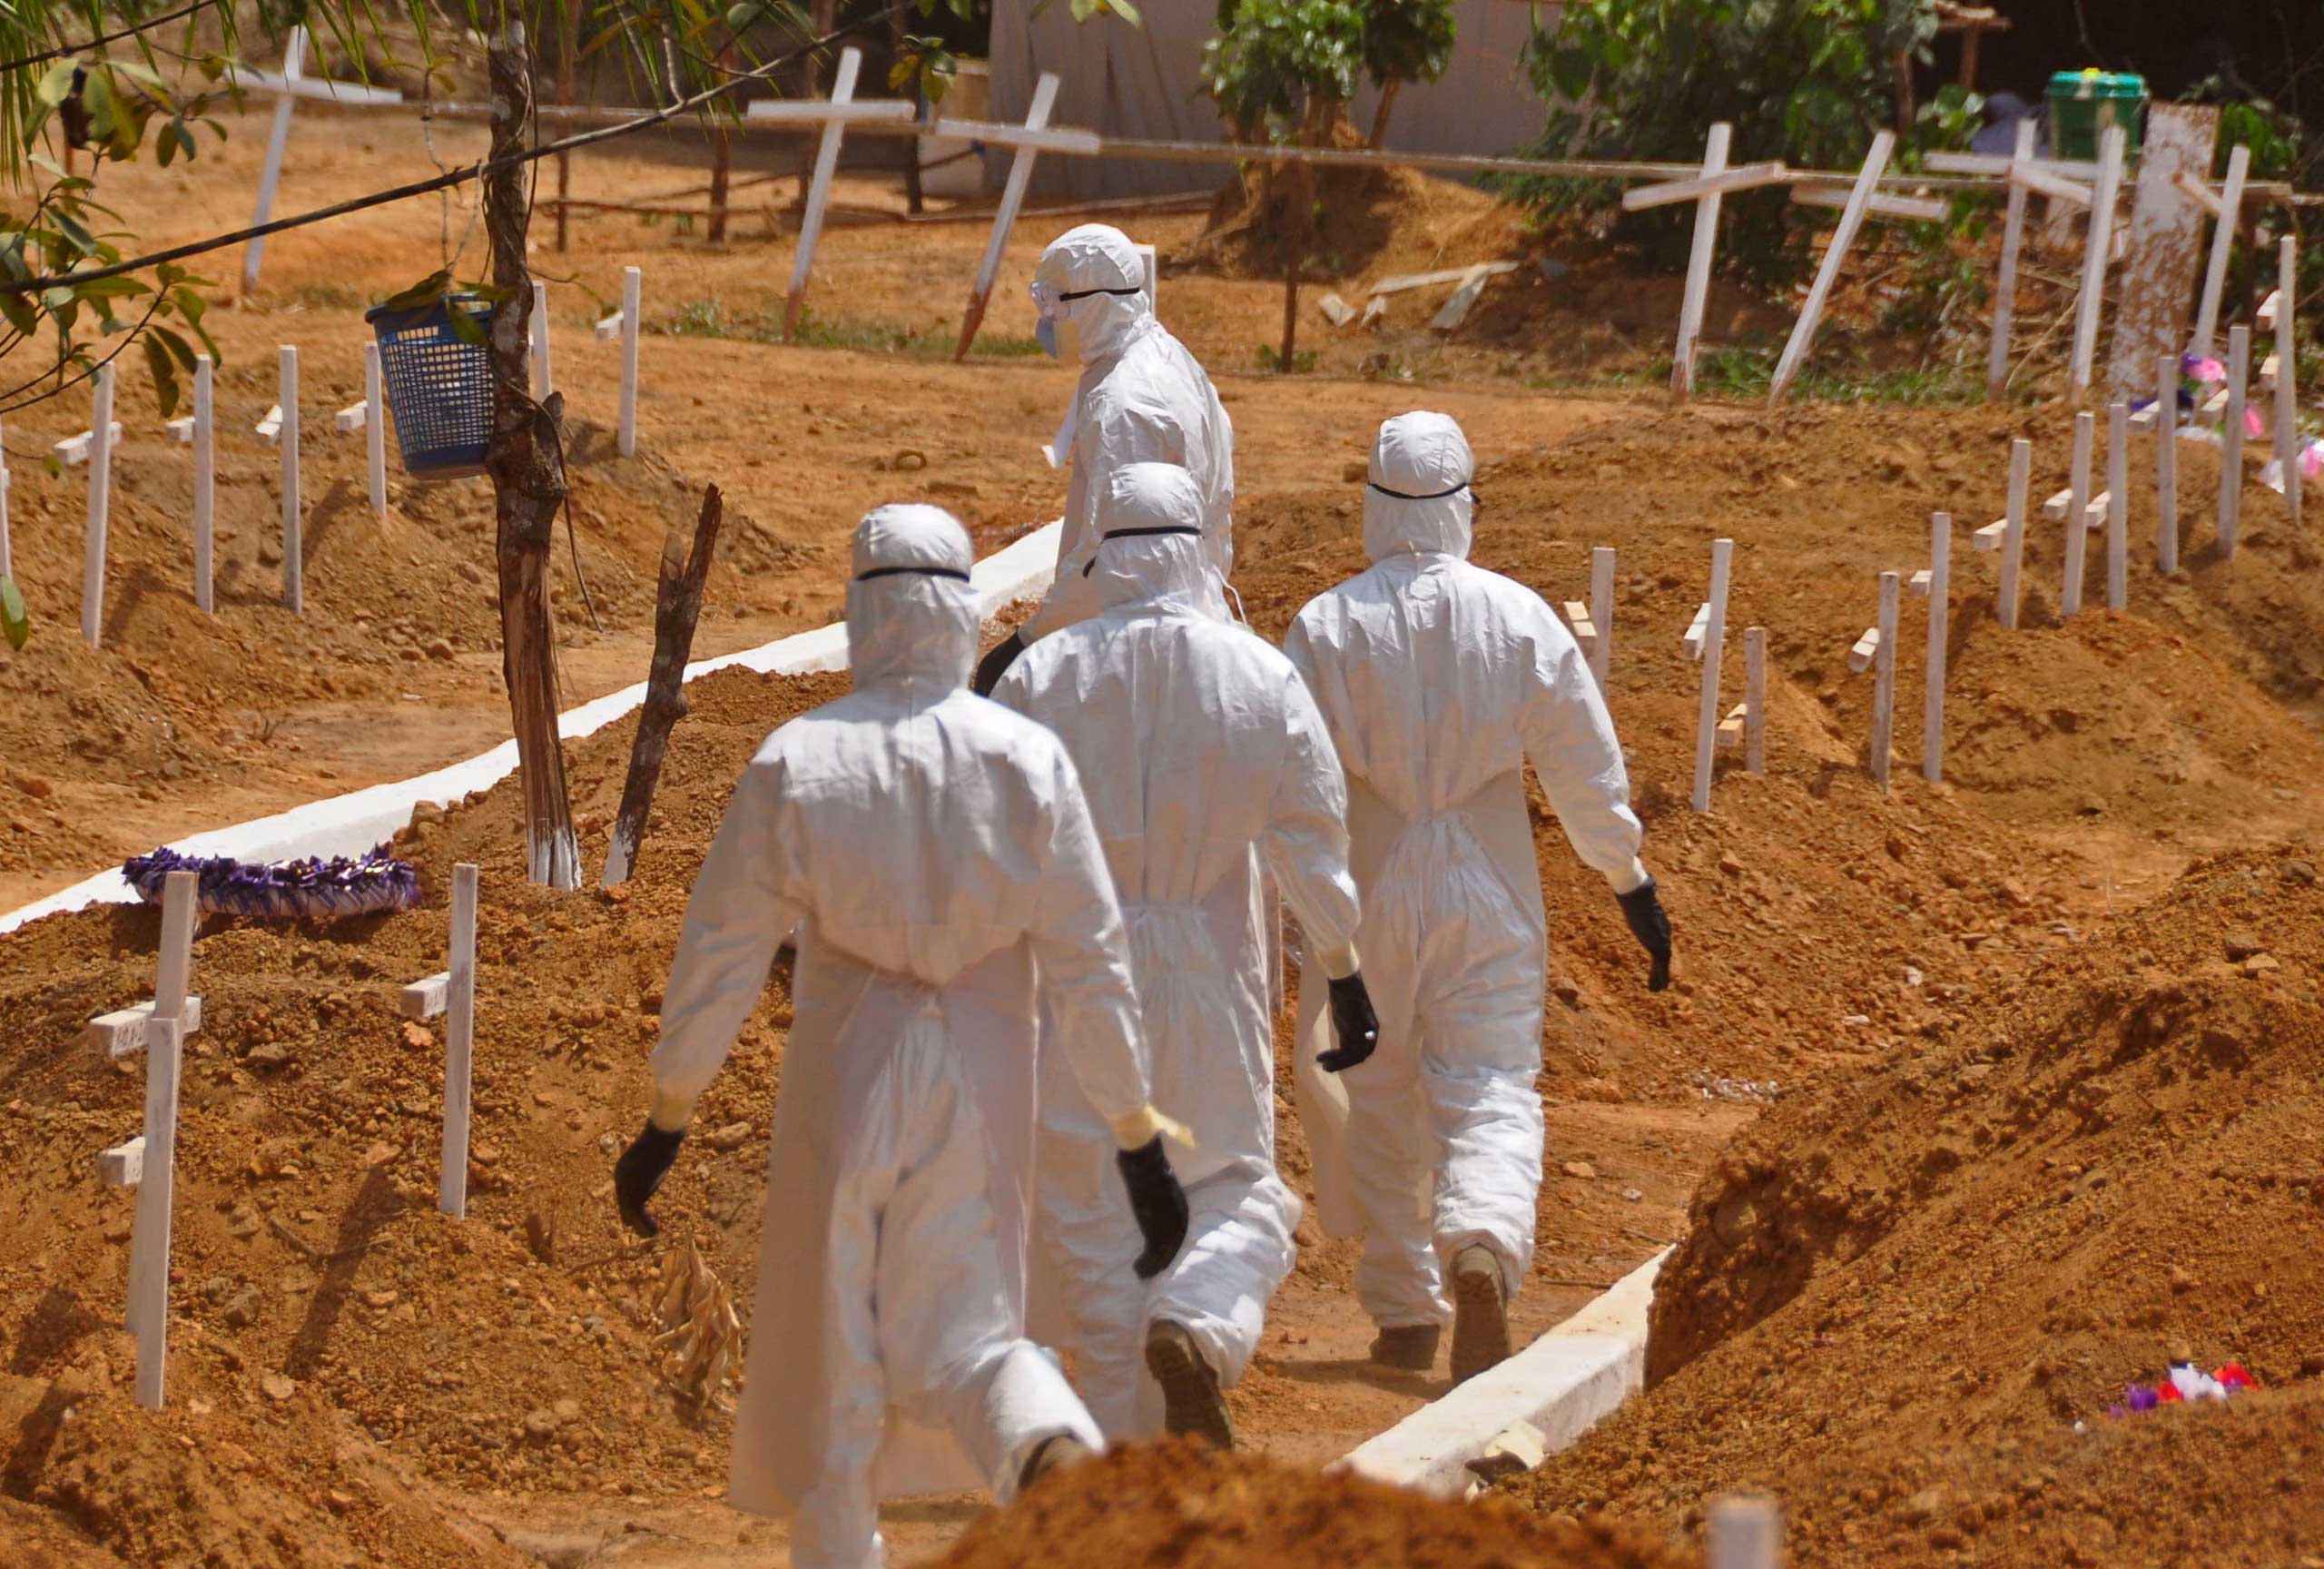 Health workers walk inside a new graveyard for Ebola victims, on the outskirts of Monrovia, Liberia on March 11, 2015. (Abbas Dulleh—AP)